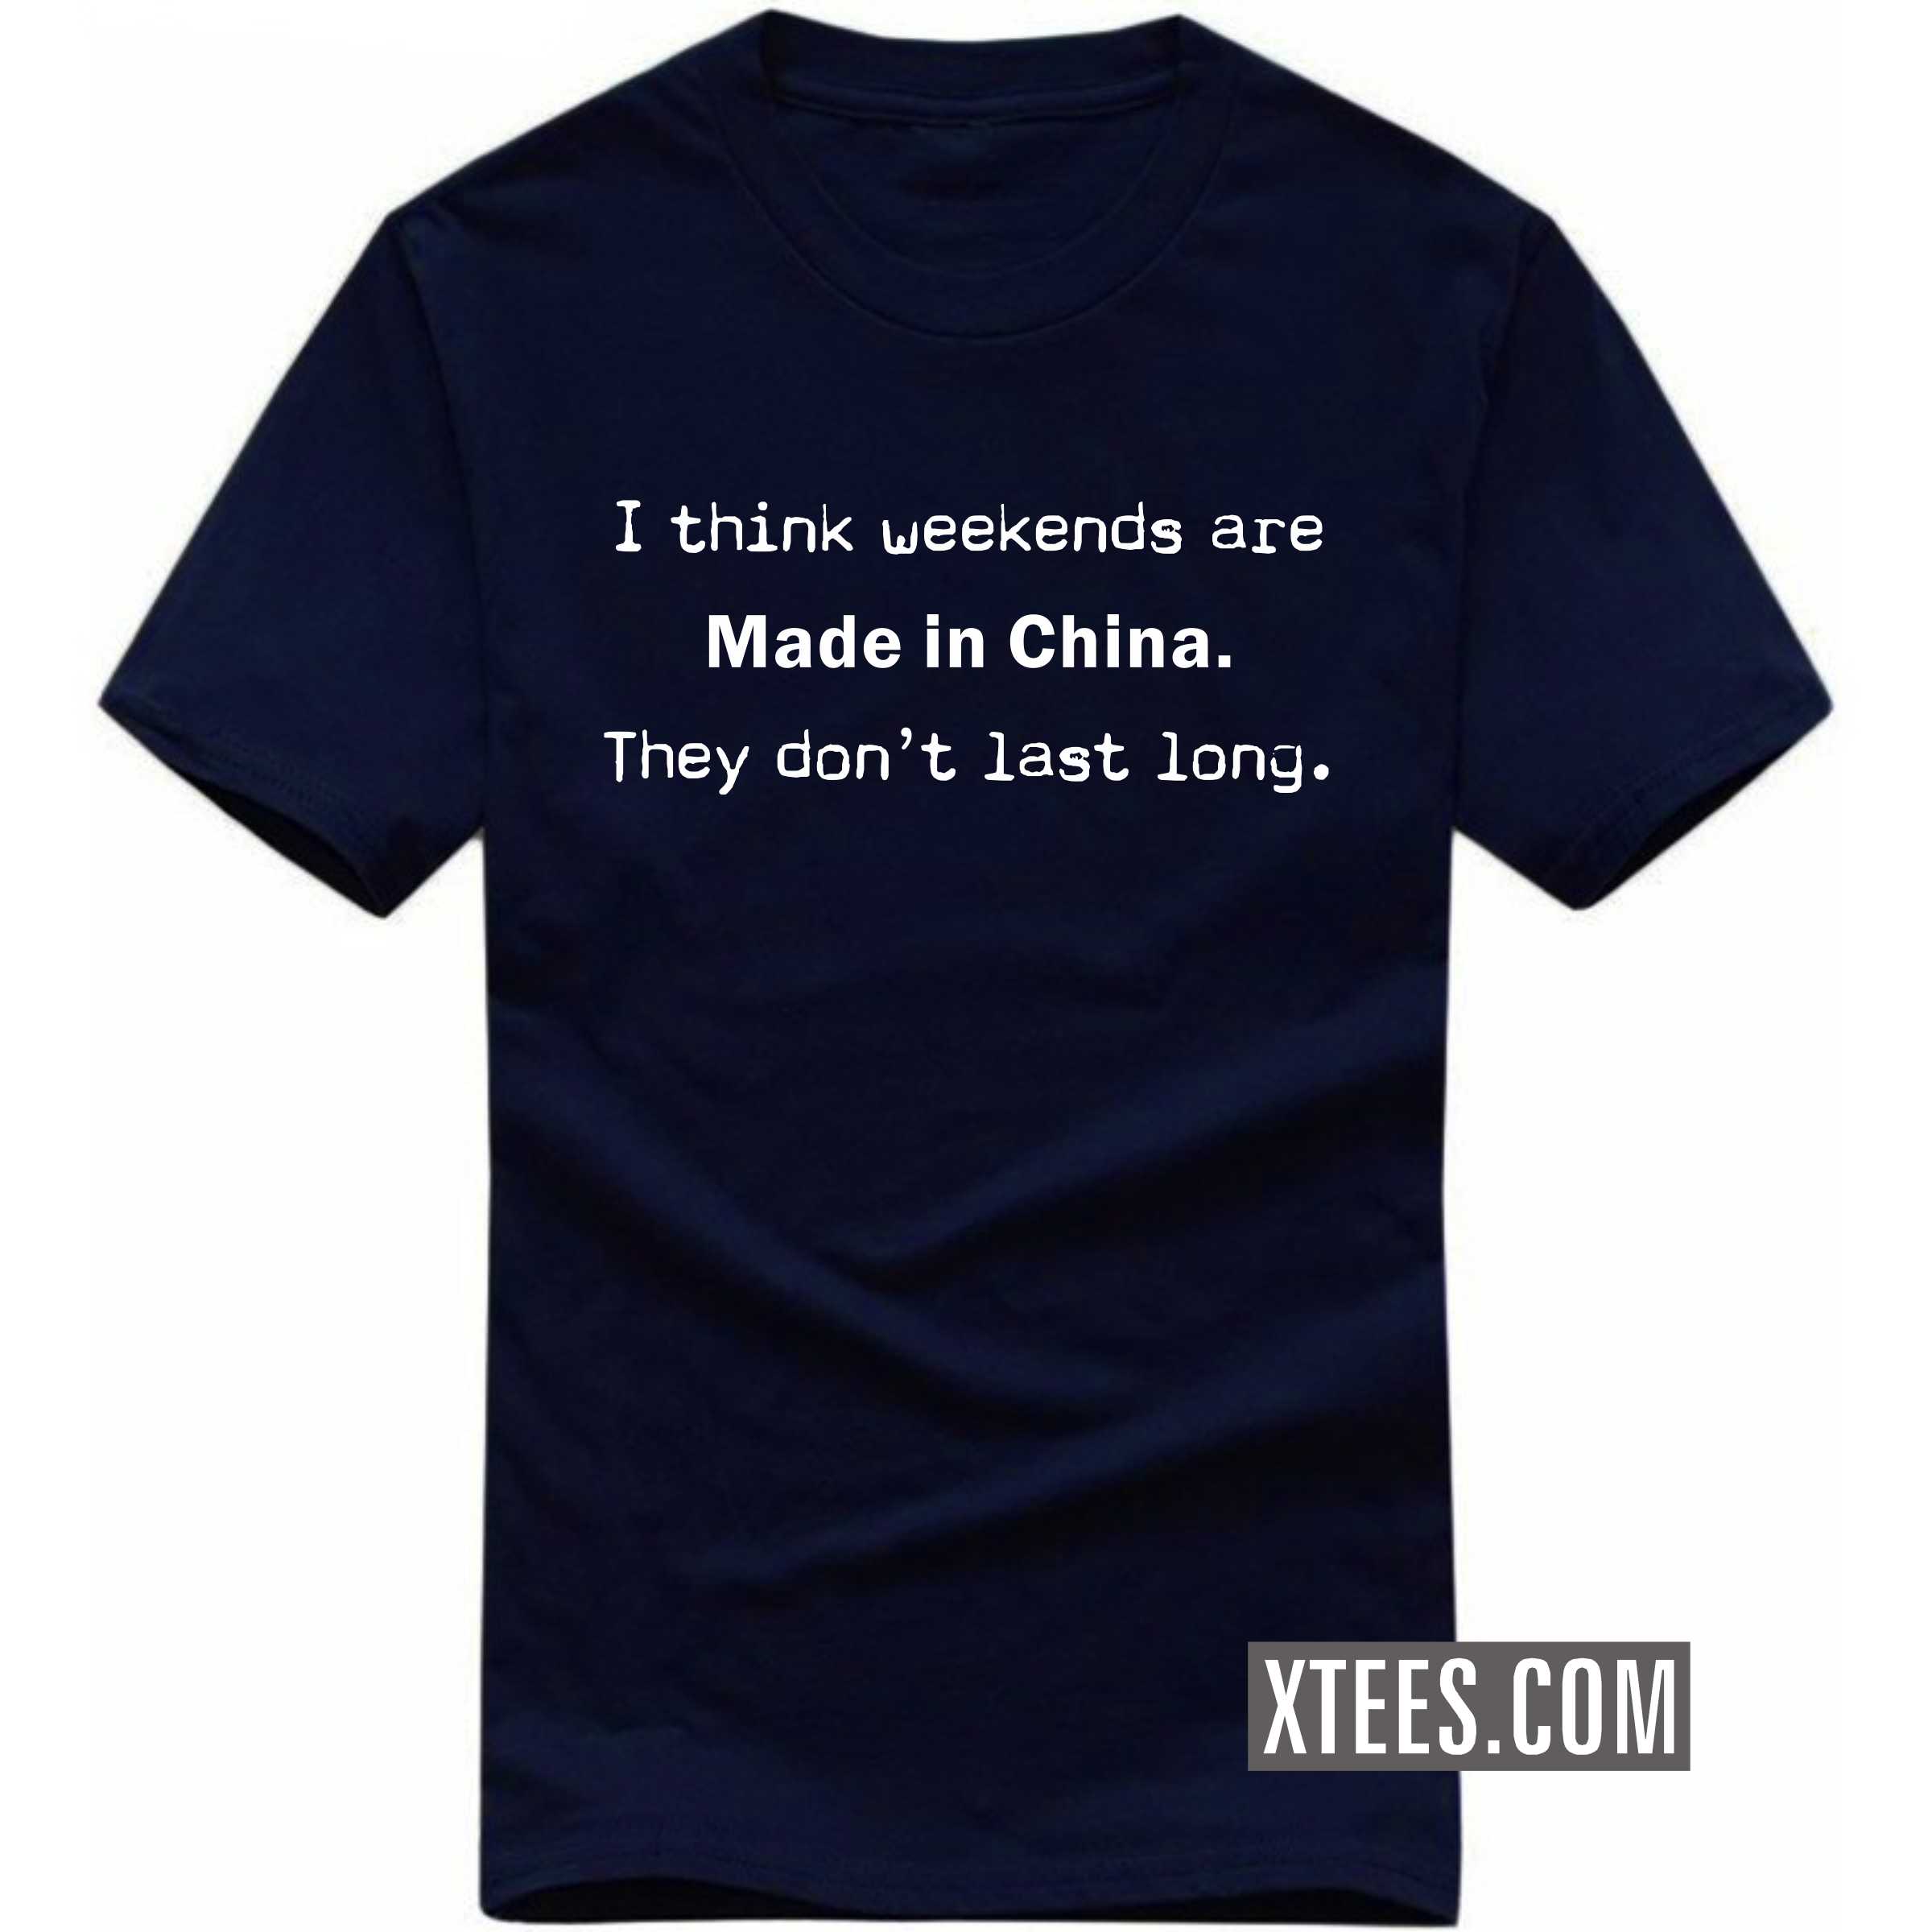 I Think Weekends Are Made In China. They Don't Last Long. Funny T-shirt India image